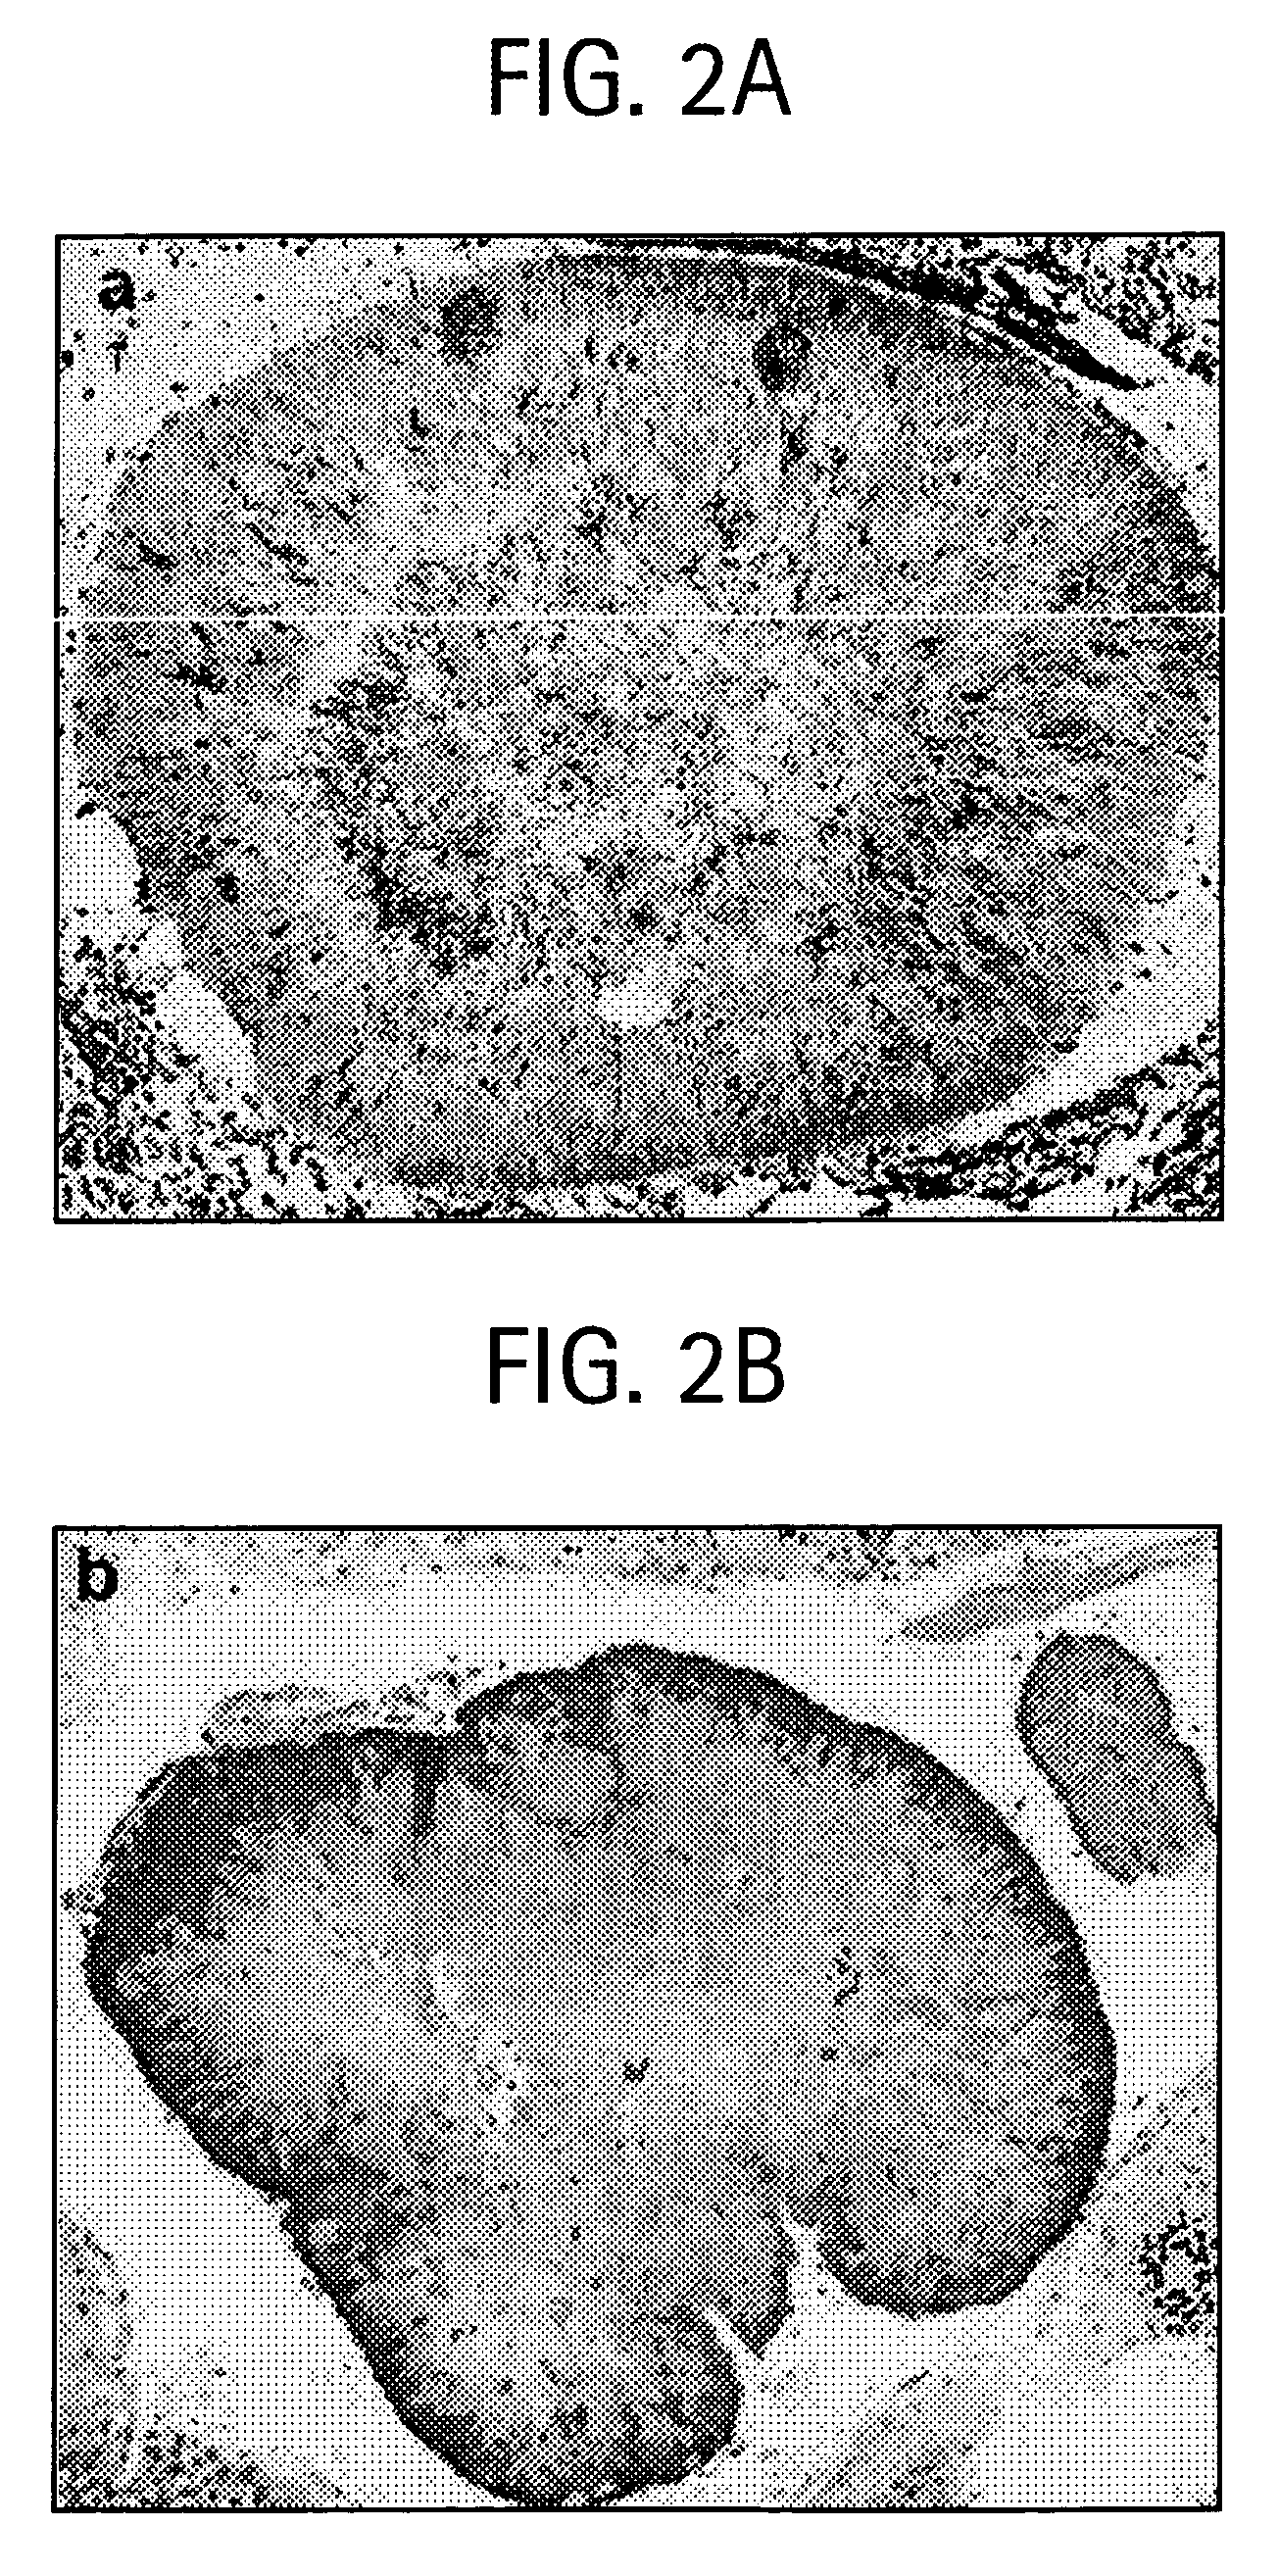 Methods for diagnosing and treating chronic tonsillitis